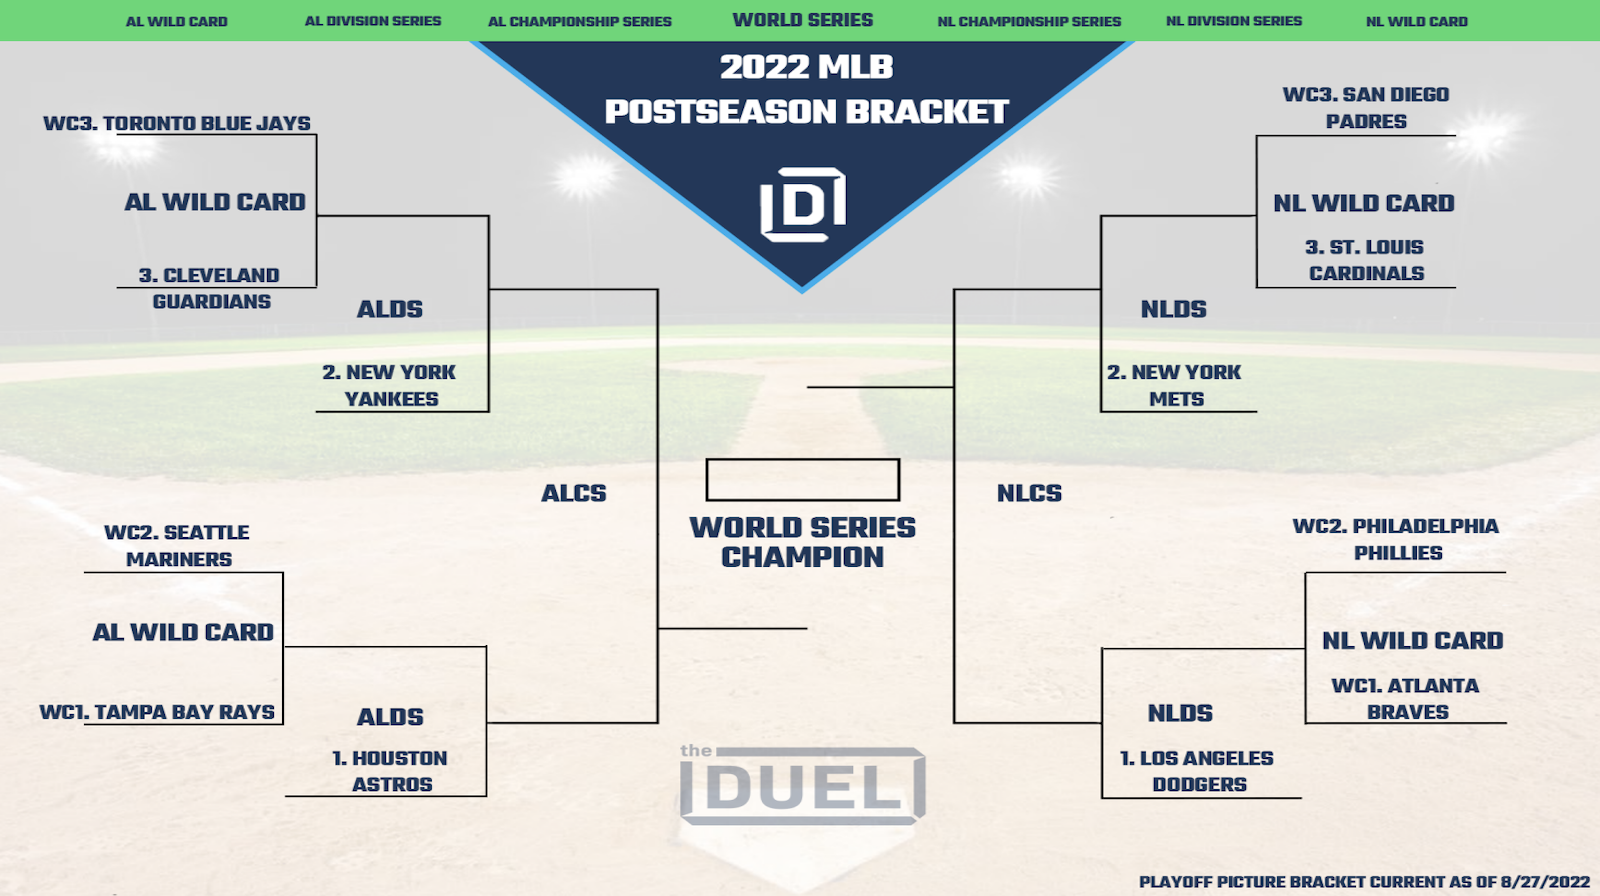 MLB - Here's our 2021 postseason bracket in all its glory